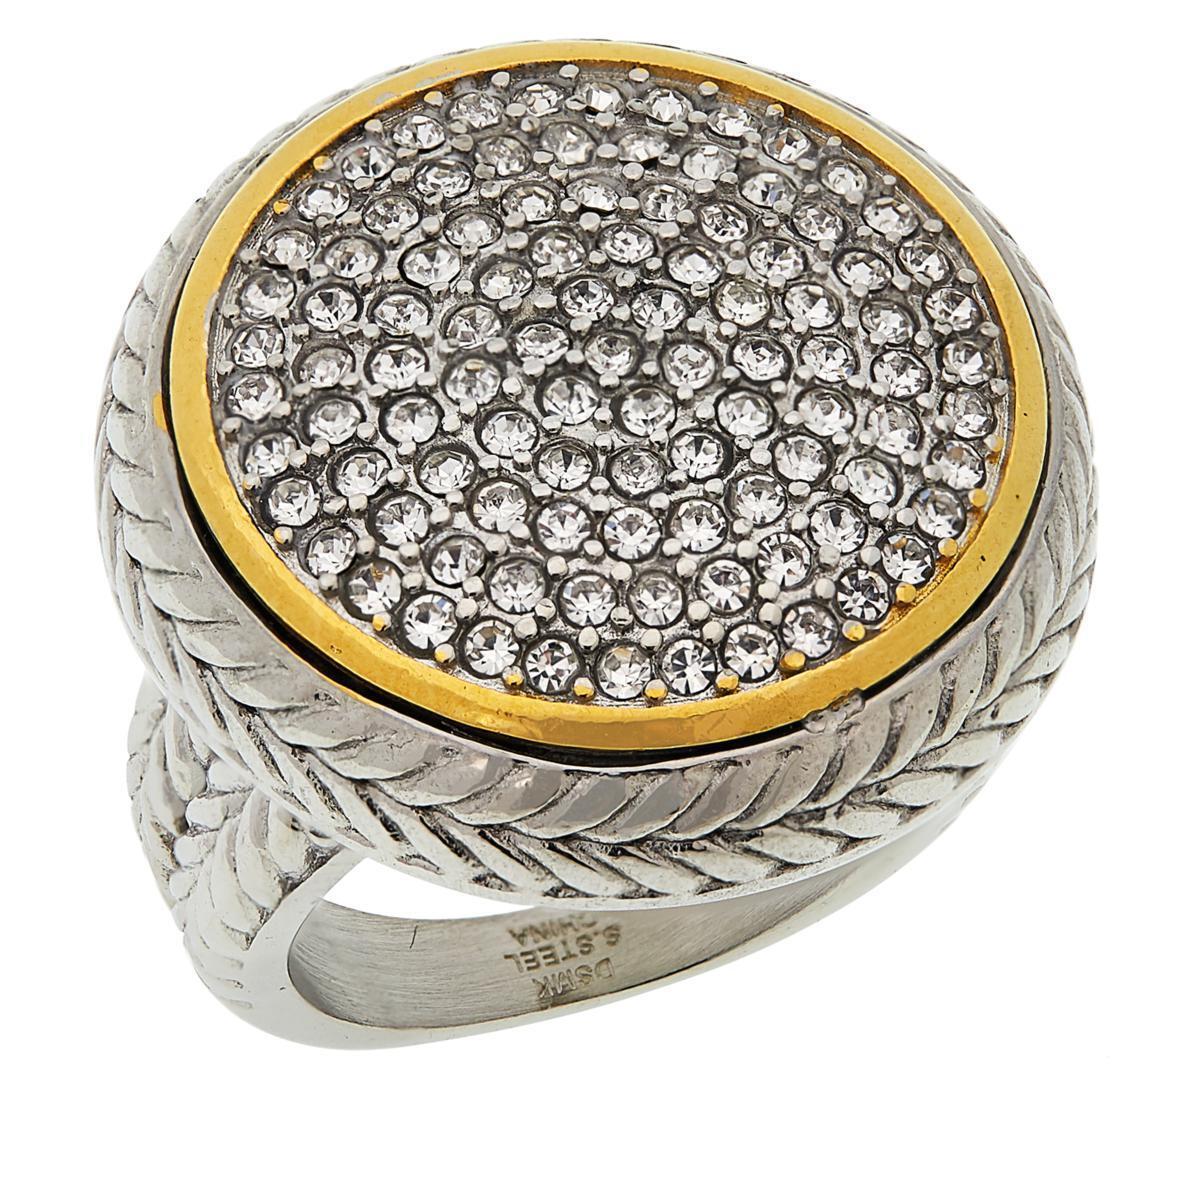 Emma Skye Stainless Steel Pav Crystal Textured 2Tone Ring. Size 7